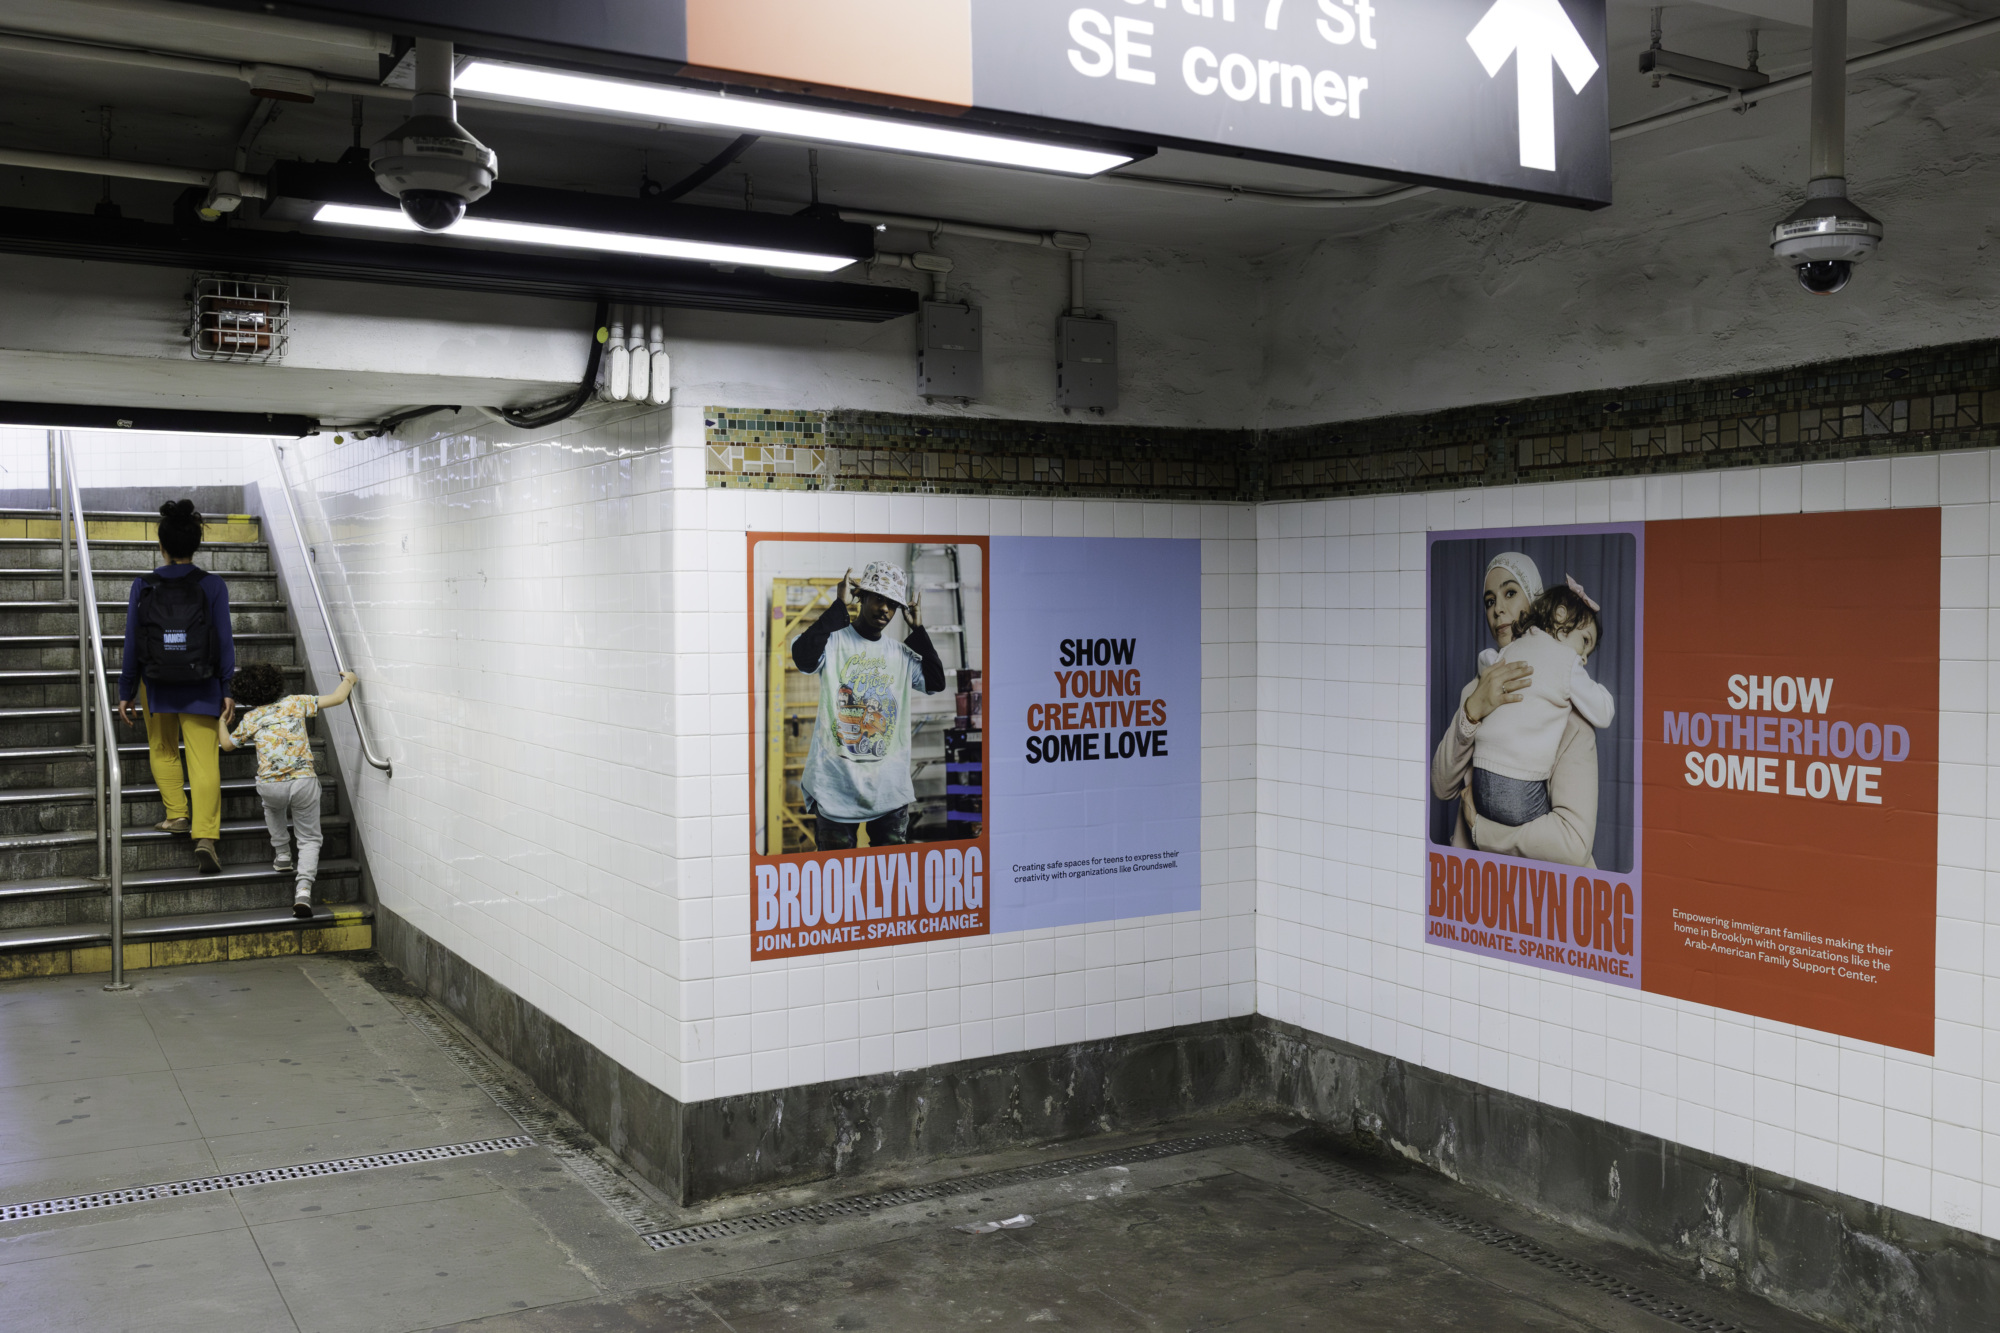 Two posters on a subway station wall. Left: "Show Young Creatives Some Love" message. Right: "Show Motherhood Some Love" message. A person and a child are ascending stairs to the left, encapsulating the spirit of community and urging us to give to Brooklyn.